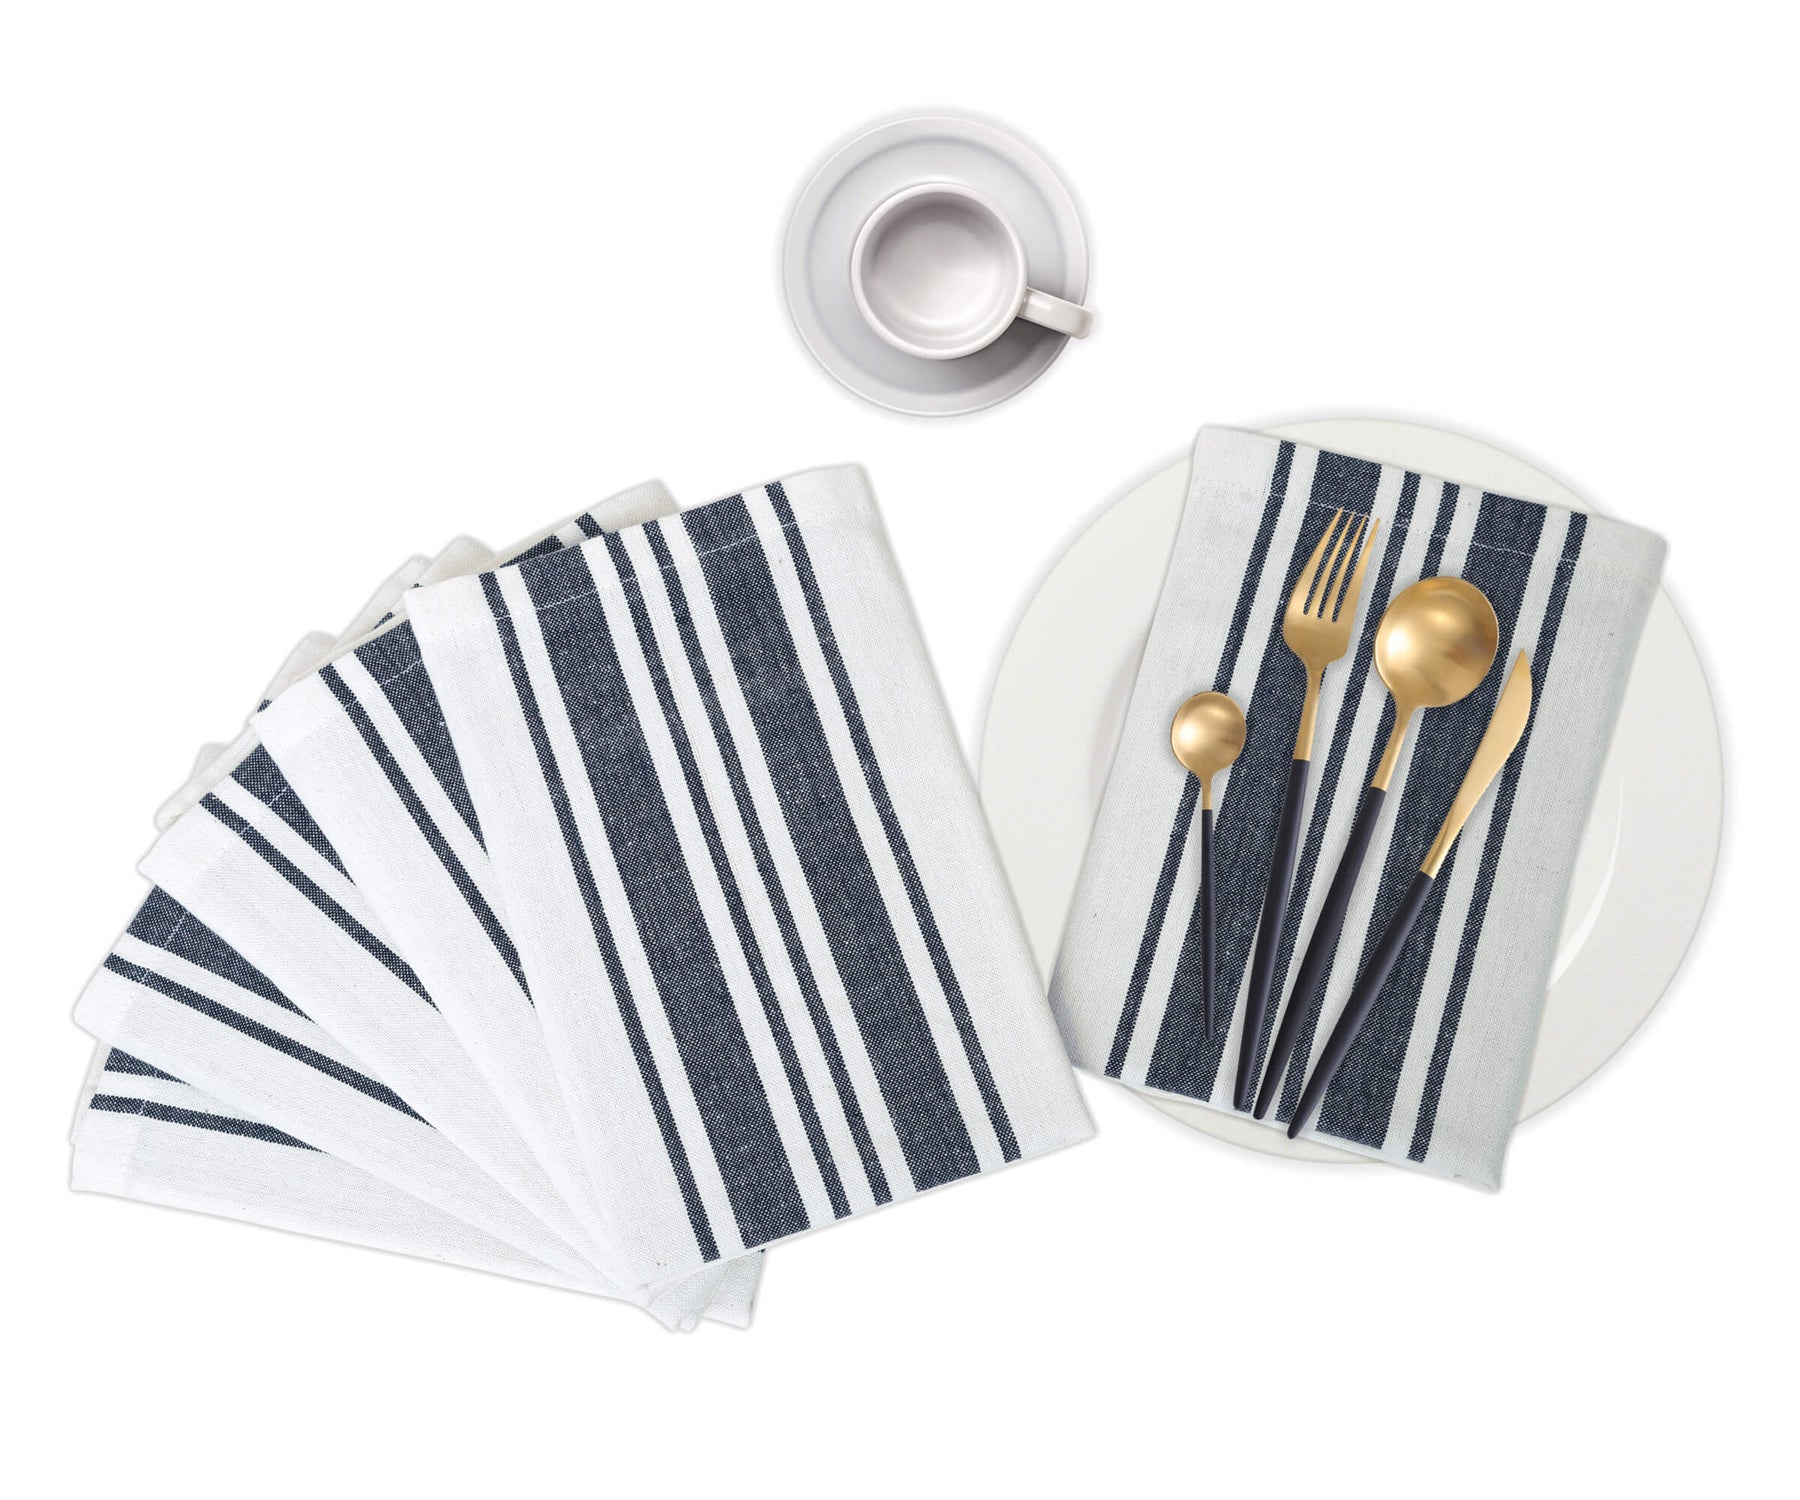 Restaurant napkins in navy blue stripes with silverware and coffee cup